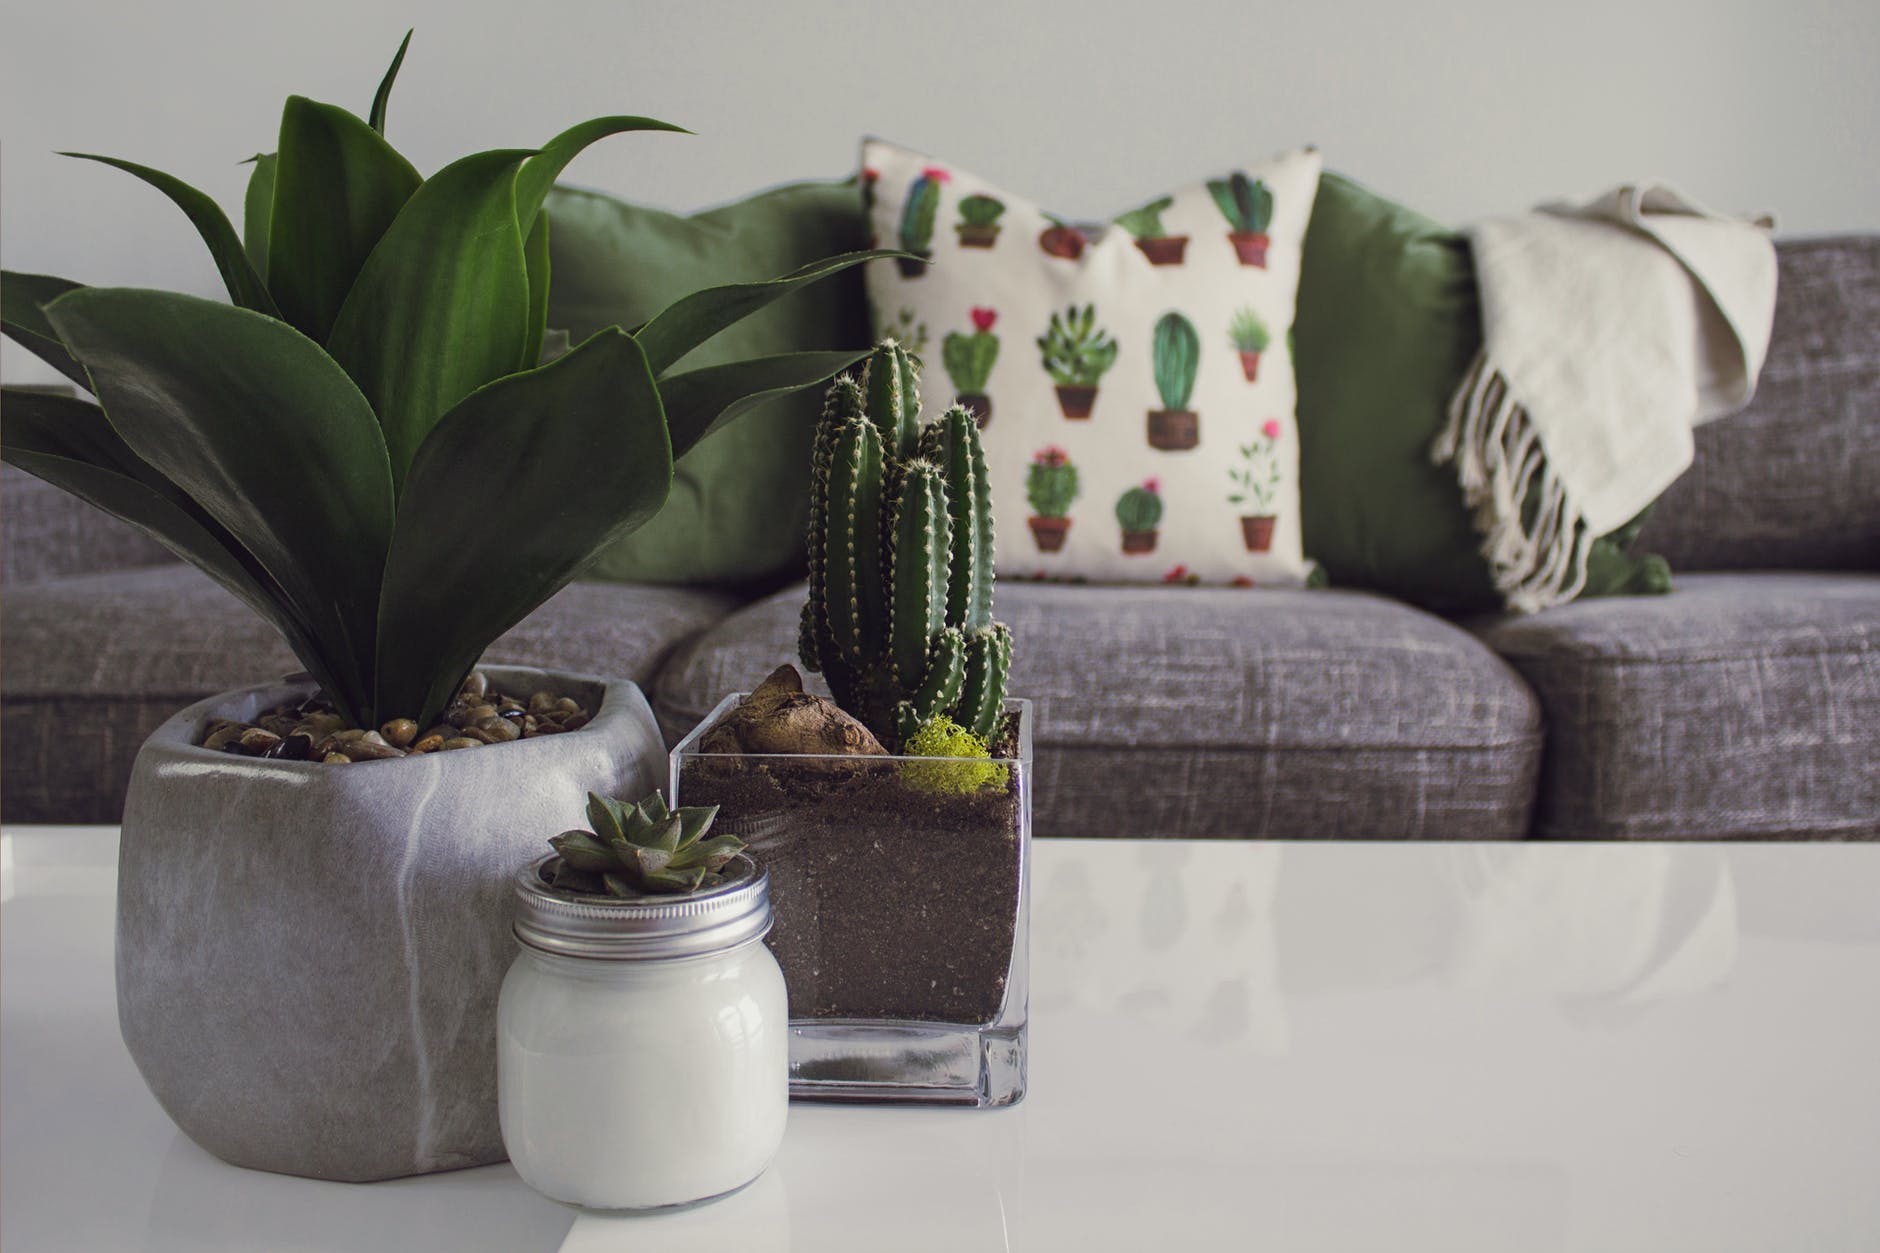 How you can use large indoor plants to design your home